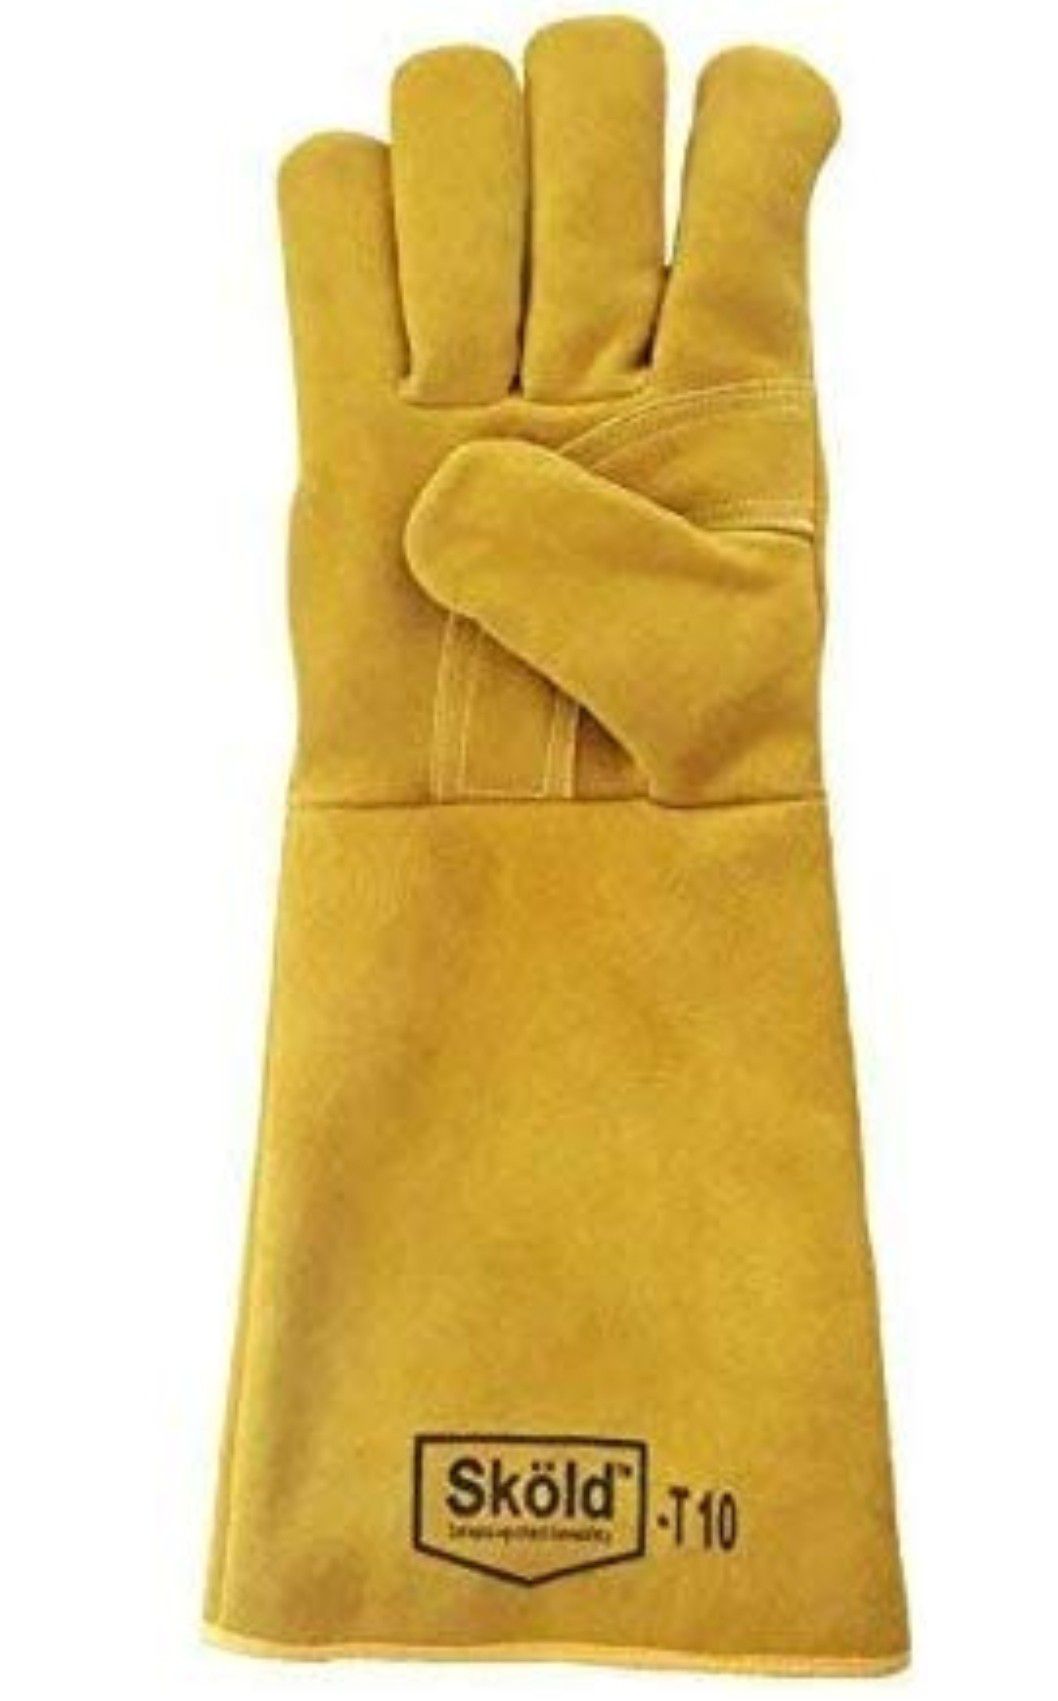 Skold Welding Gloves Heat Resistant Cow Split Leather BBQ/Camping/Cooking Gloves Baking Grill Gloves Welder Fireplace Stove